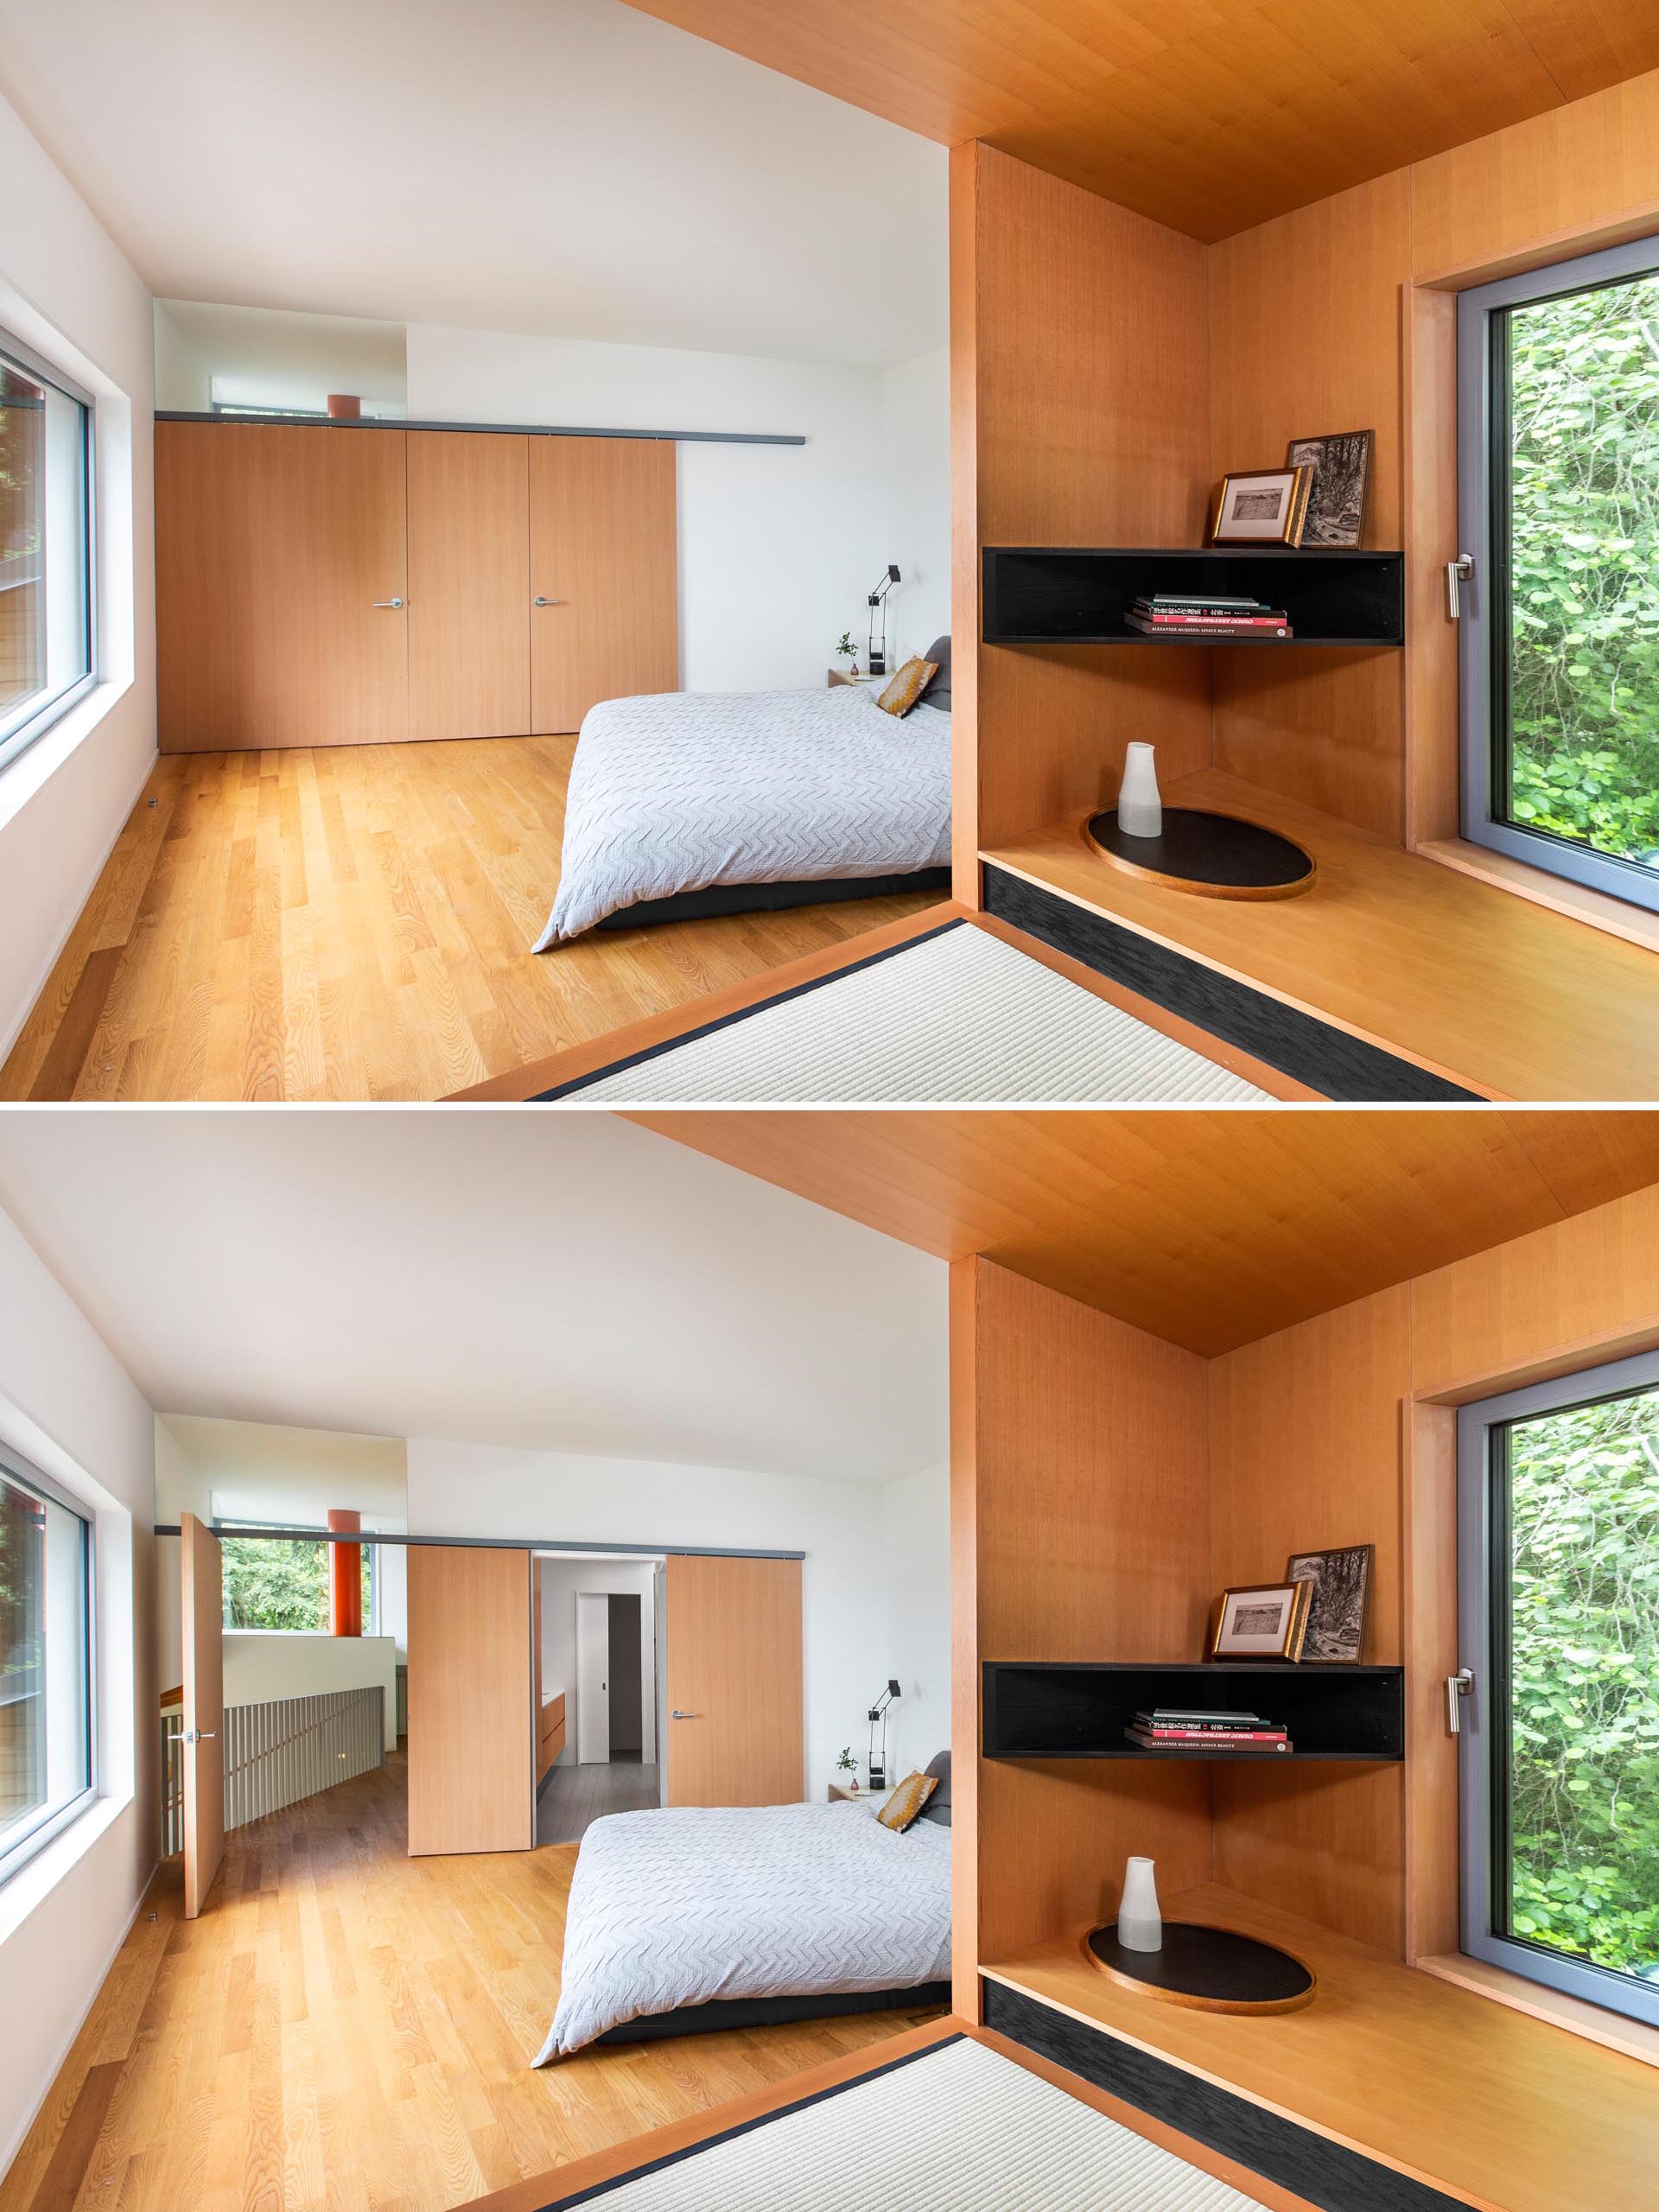 A pivoting bedroom door was made possible by the installation of a custom track that also enables a sliding bathroom door. Both the doors and a panel are made from fir.